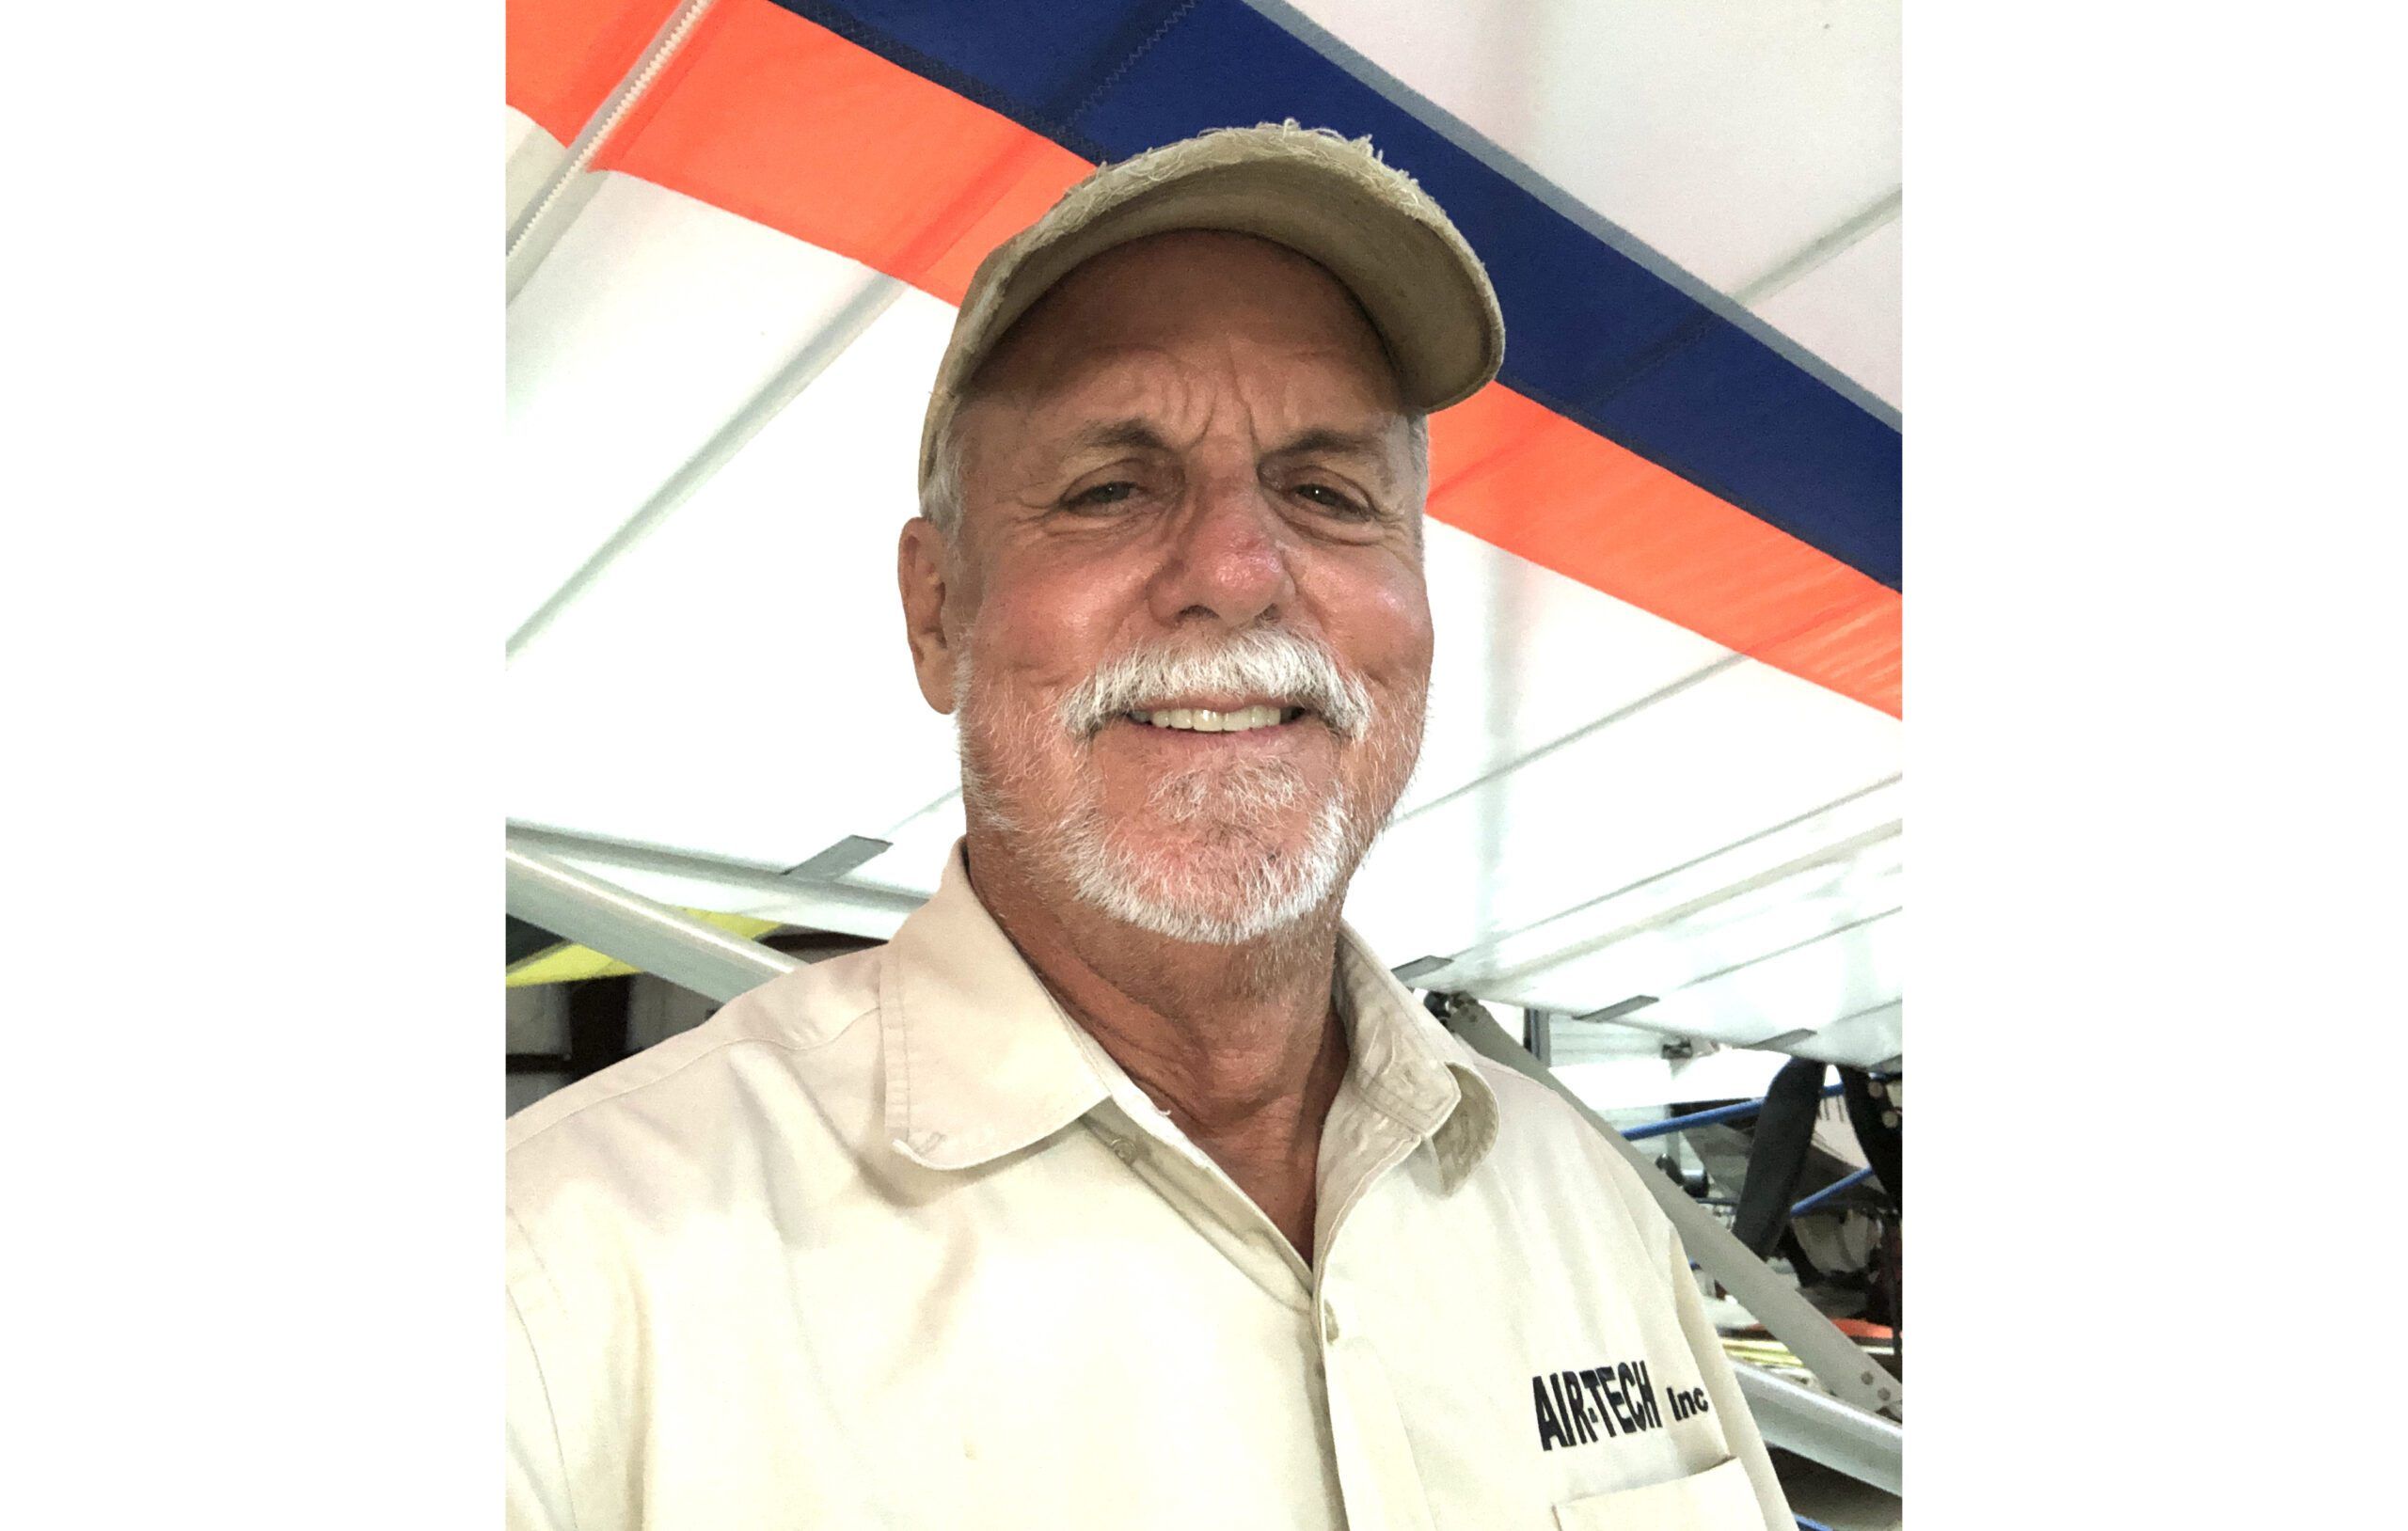 Gene Borne To Be Inducted Into EAA Ultralights Hall of Fame